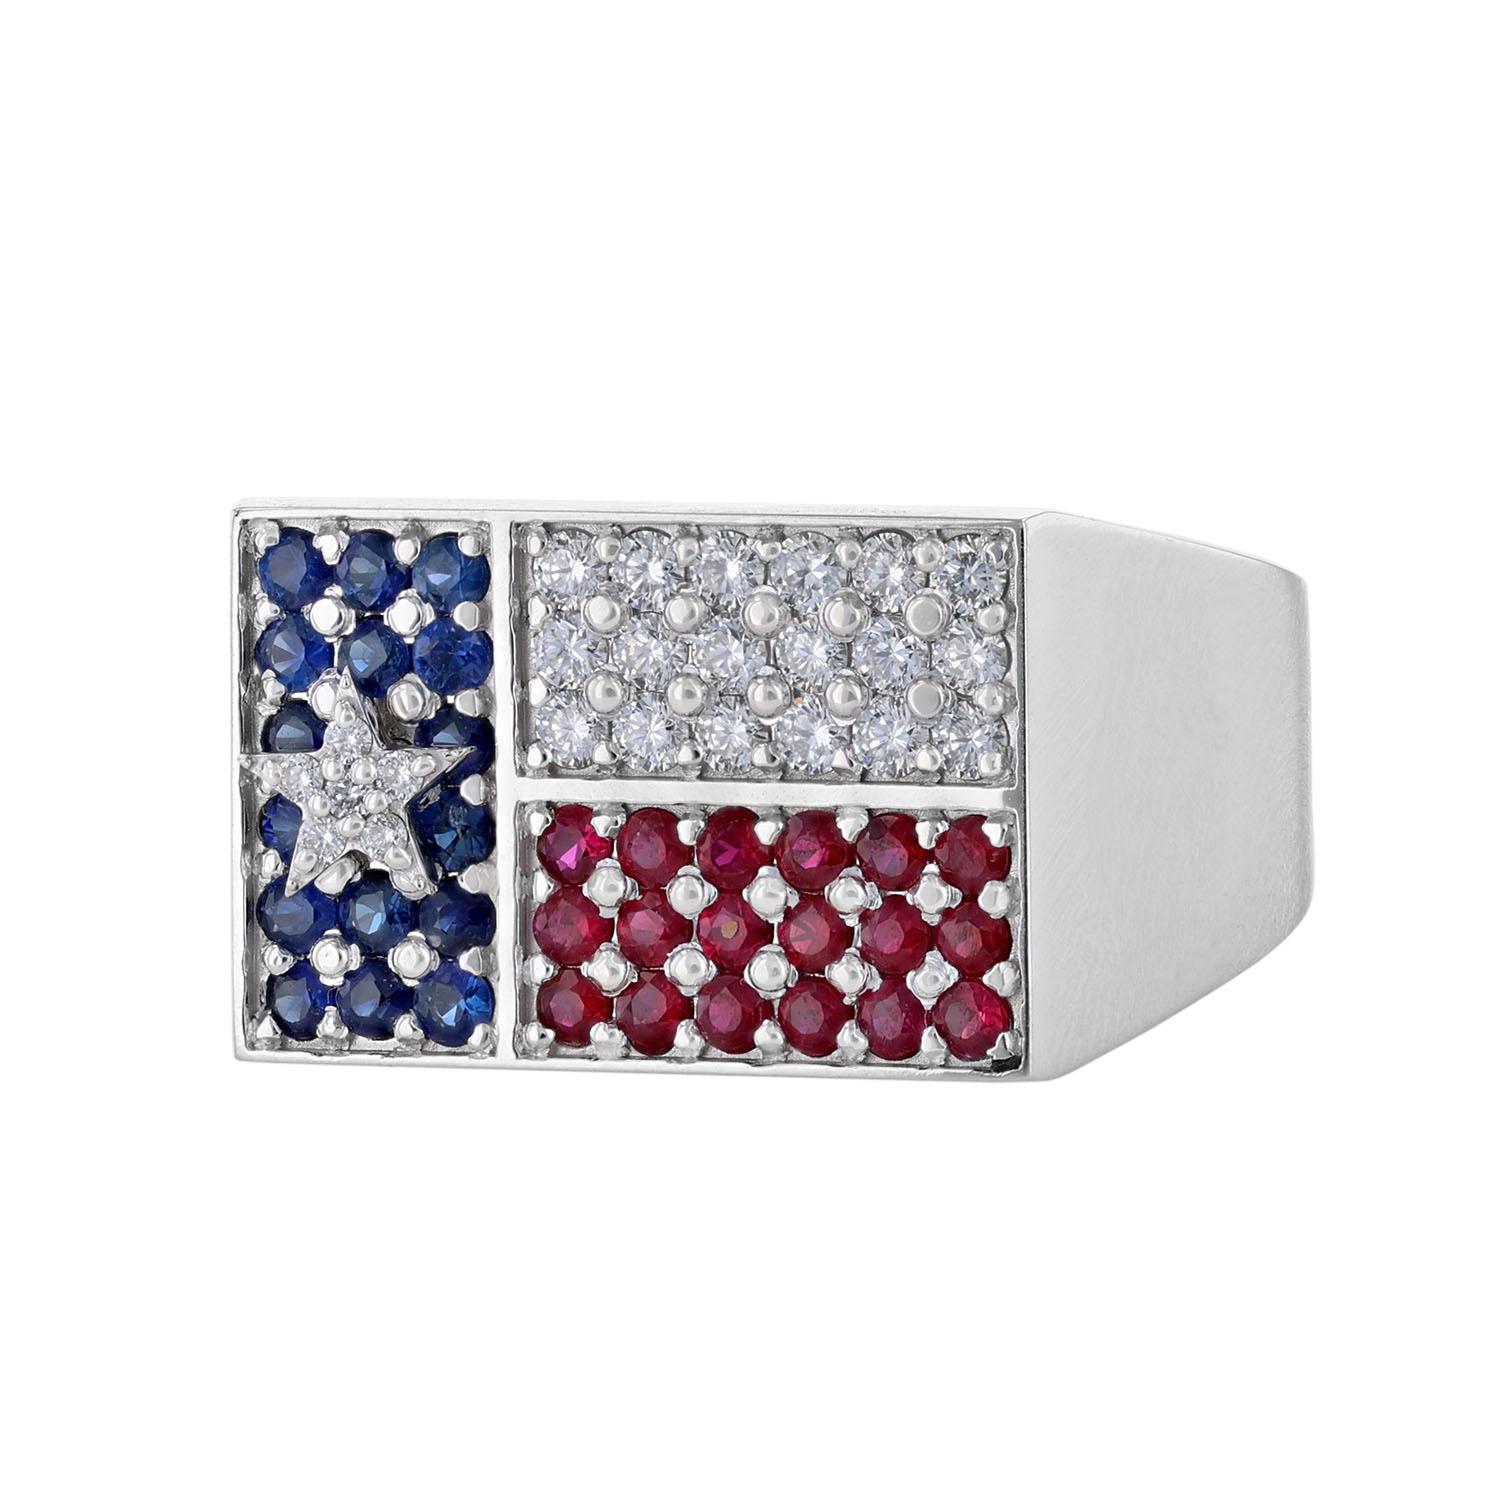 This men's Texas flag ring is made in 14K white gold. It features 16 blue sapphires weighing 0.52 carat.. It also includes 18 rubies weighing 0.59 carat, and 24 diamonds weighing 0.53 carat. All stones are pave’ set. The ring has a color grade (H)